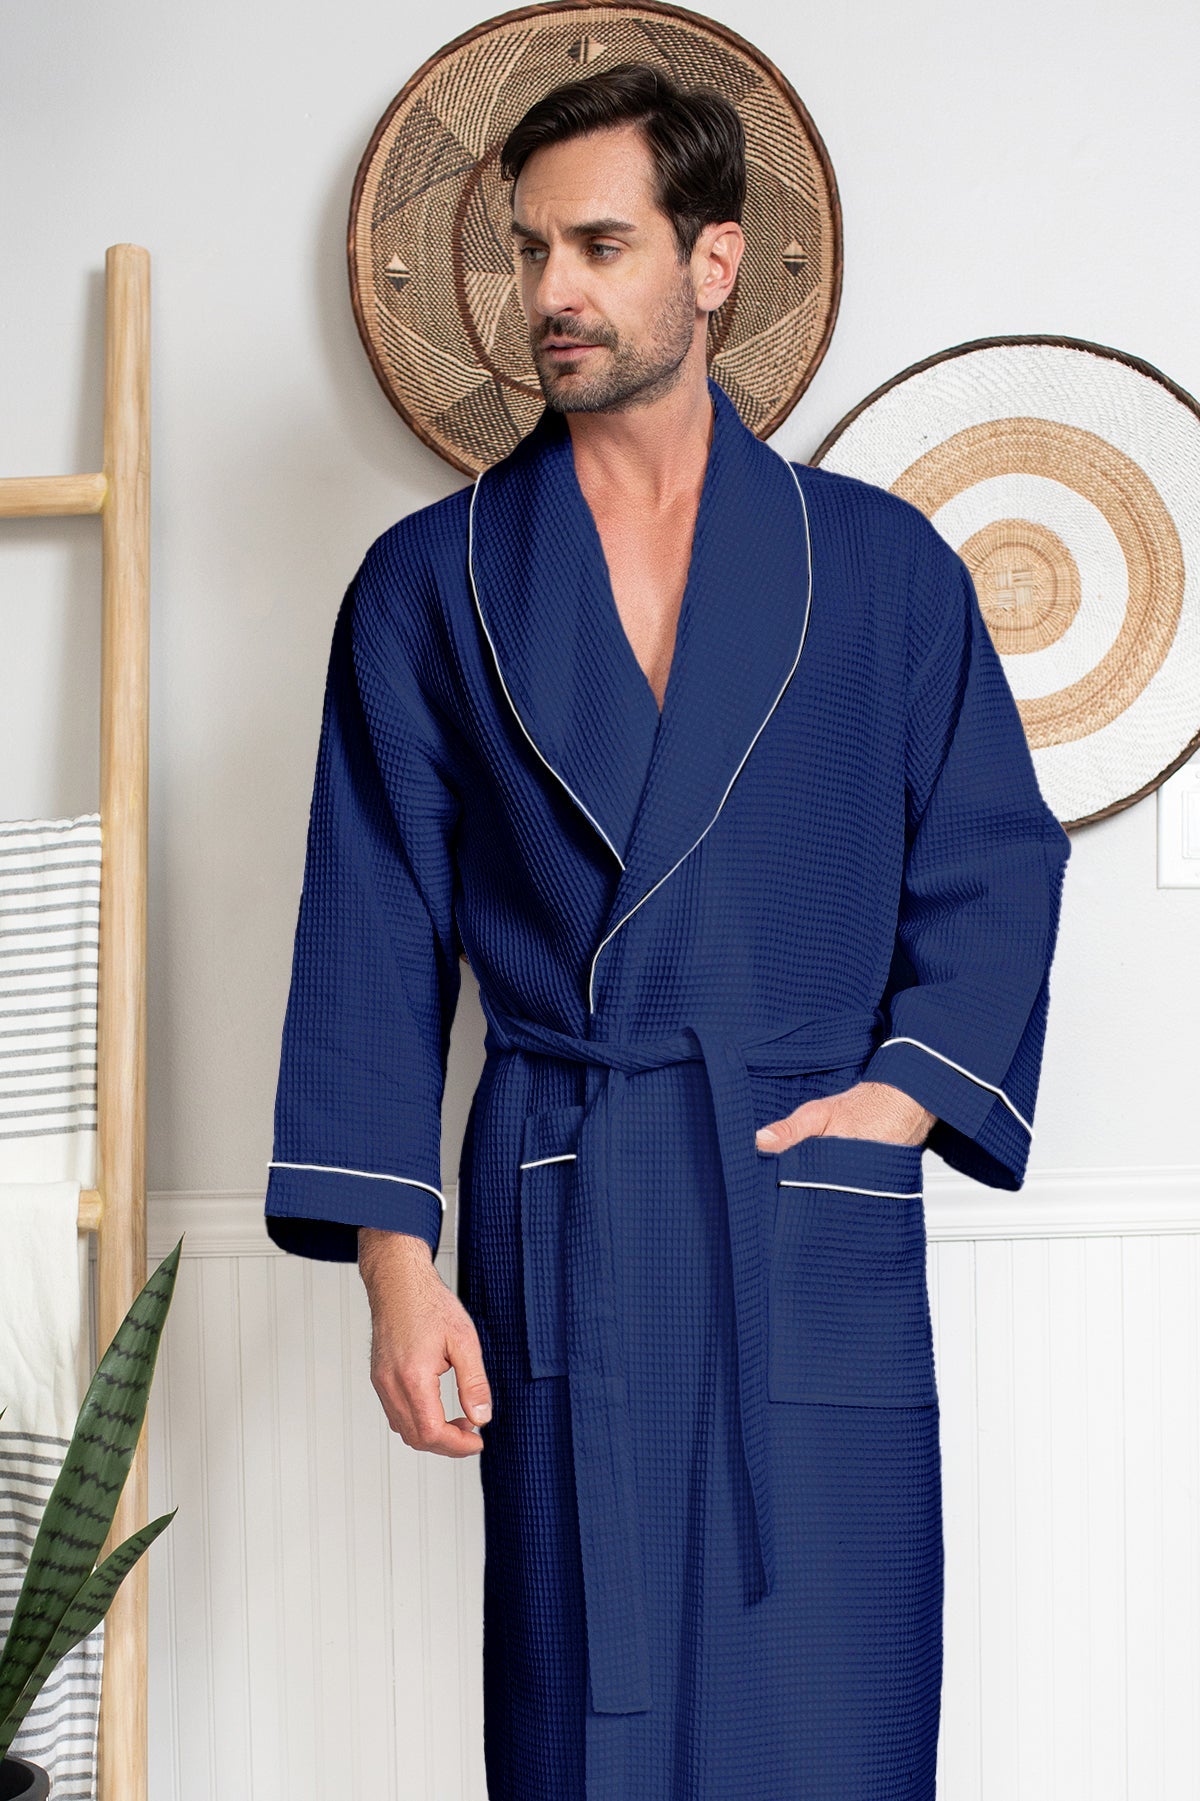 Piped waffle robe, Majestic, Shop Men's Bathrobes Online